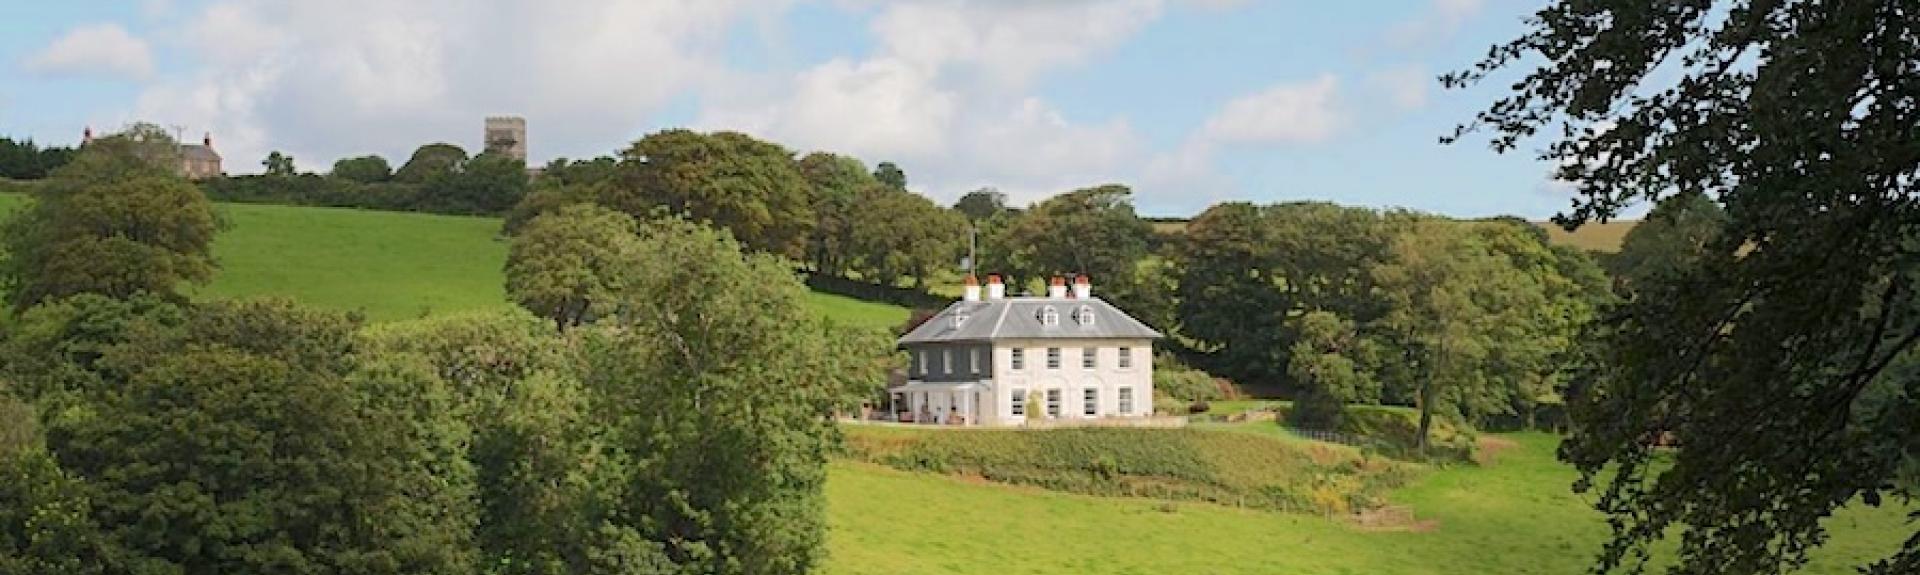 A Cornish country house glimpsed between trees overlooks a grassy hillside.